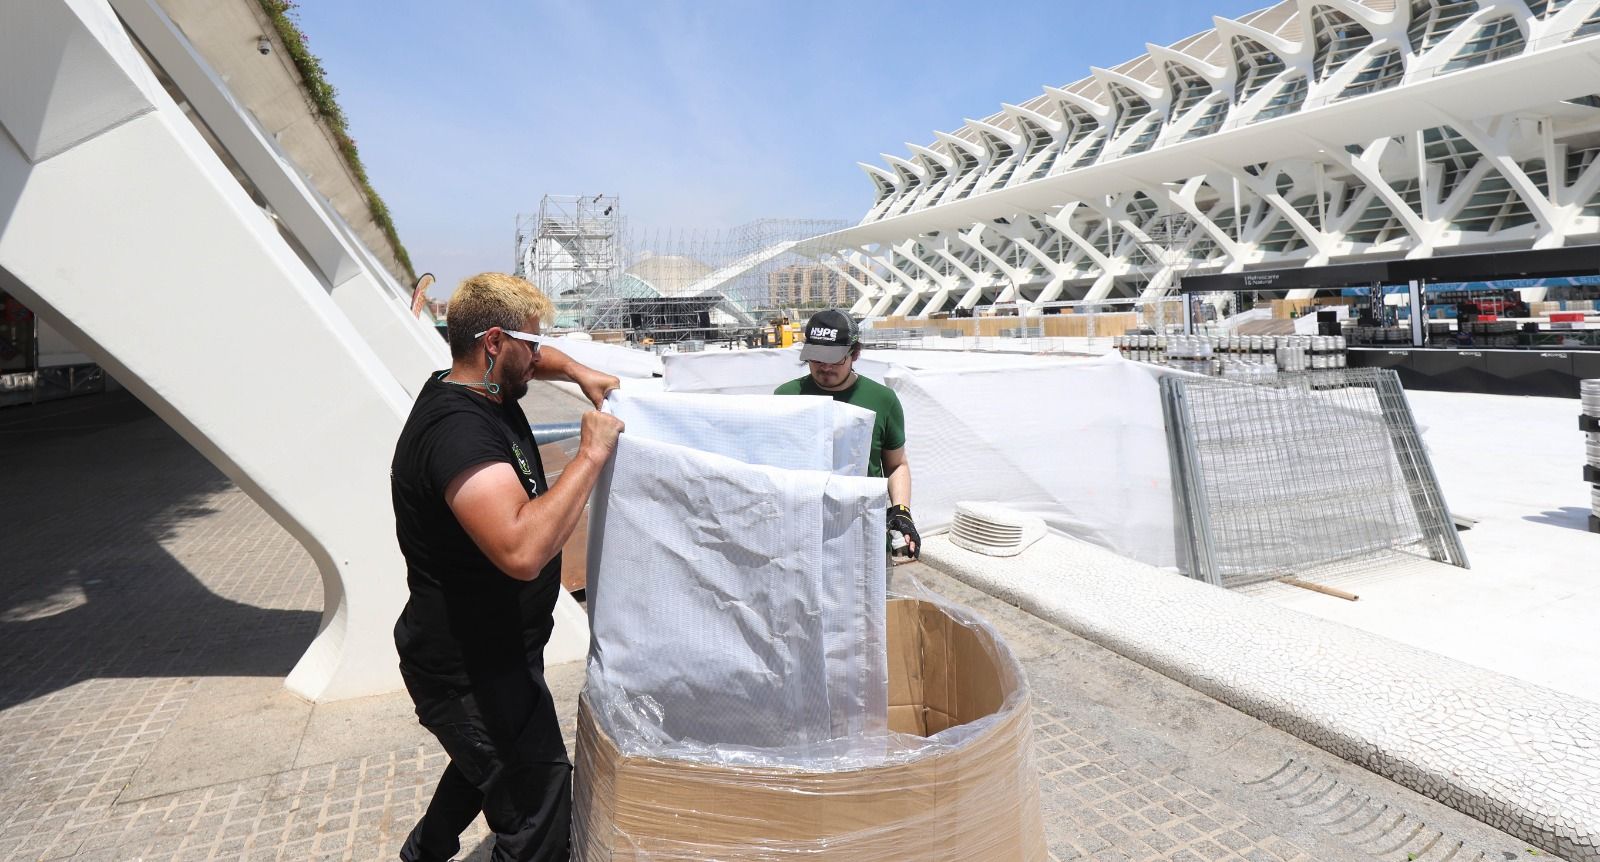 The City of Arts and Sciences is preparing for the Arts Festival